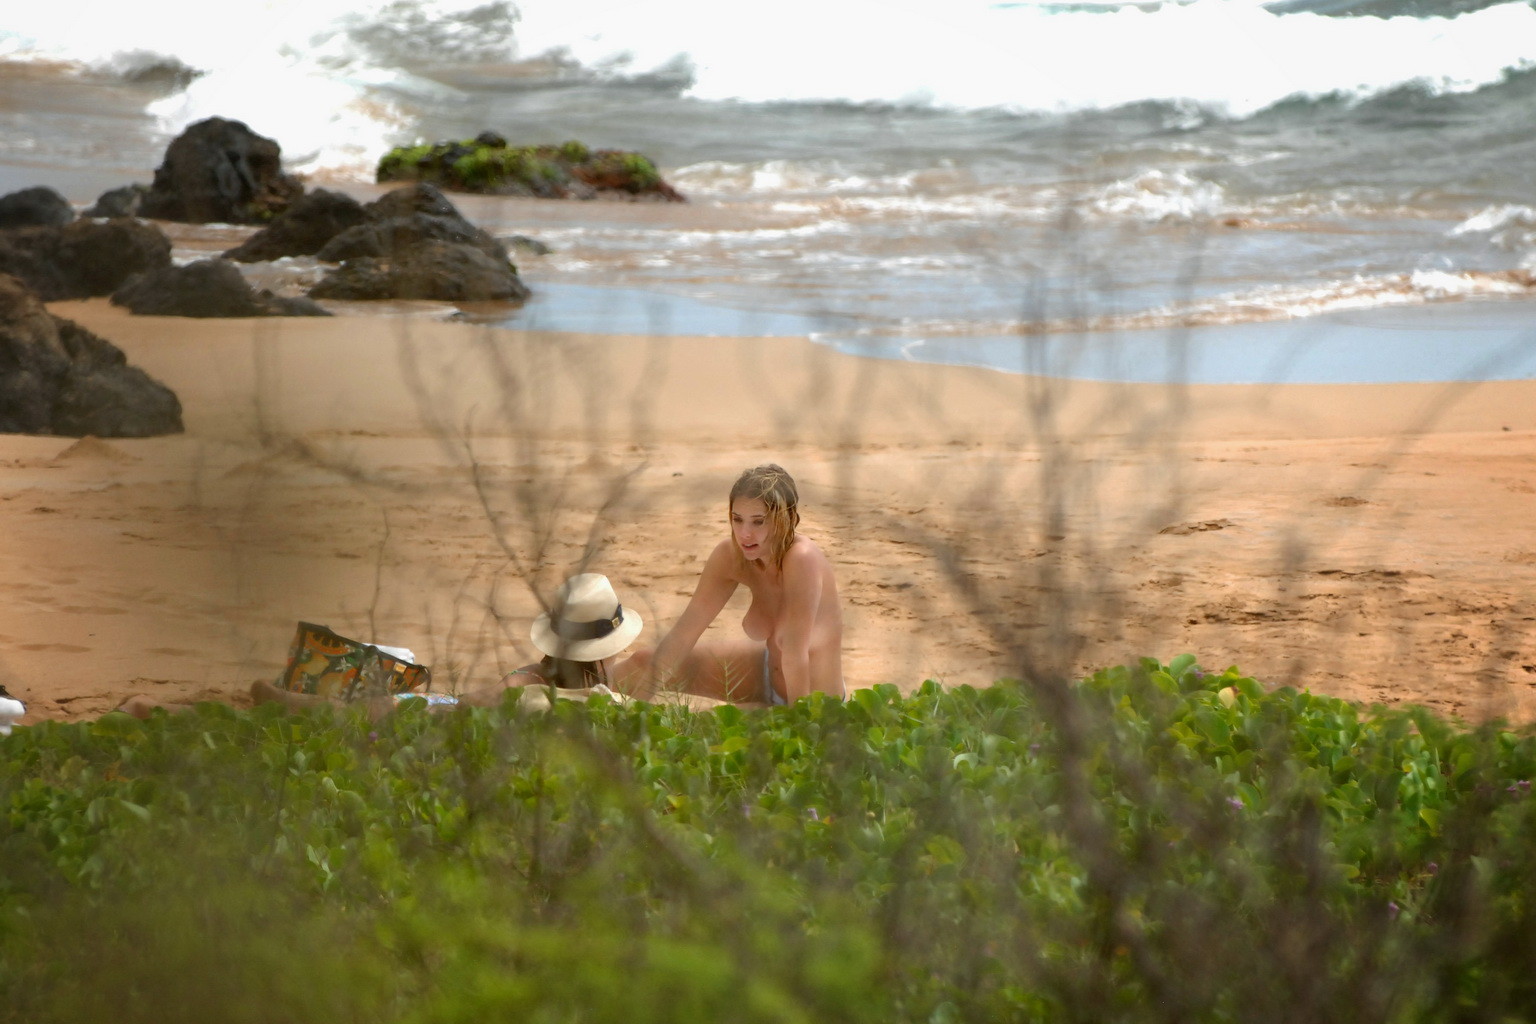 Ashley benson beccata in topless in spiaggia alle hawaii
 #75191405